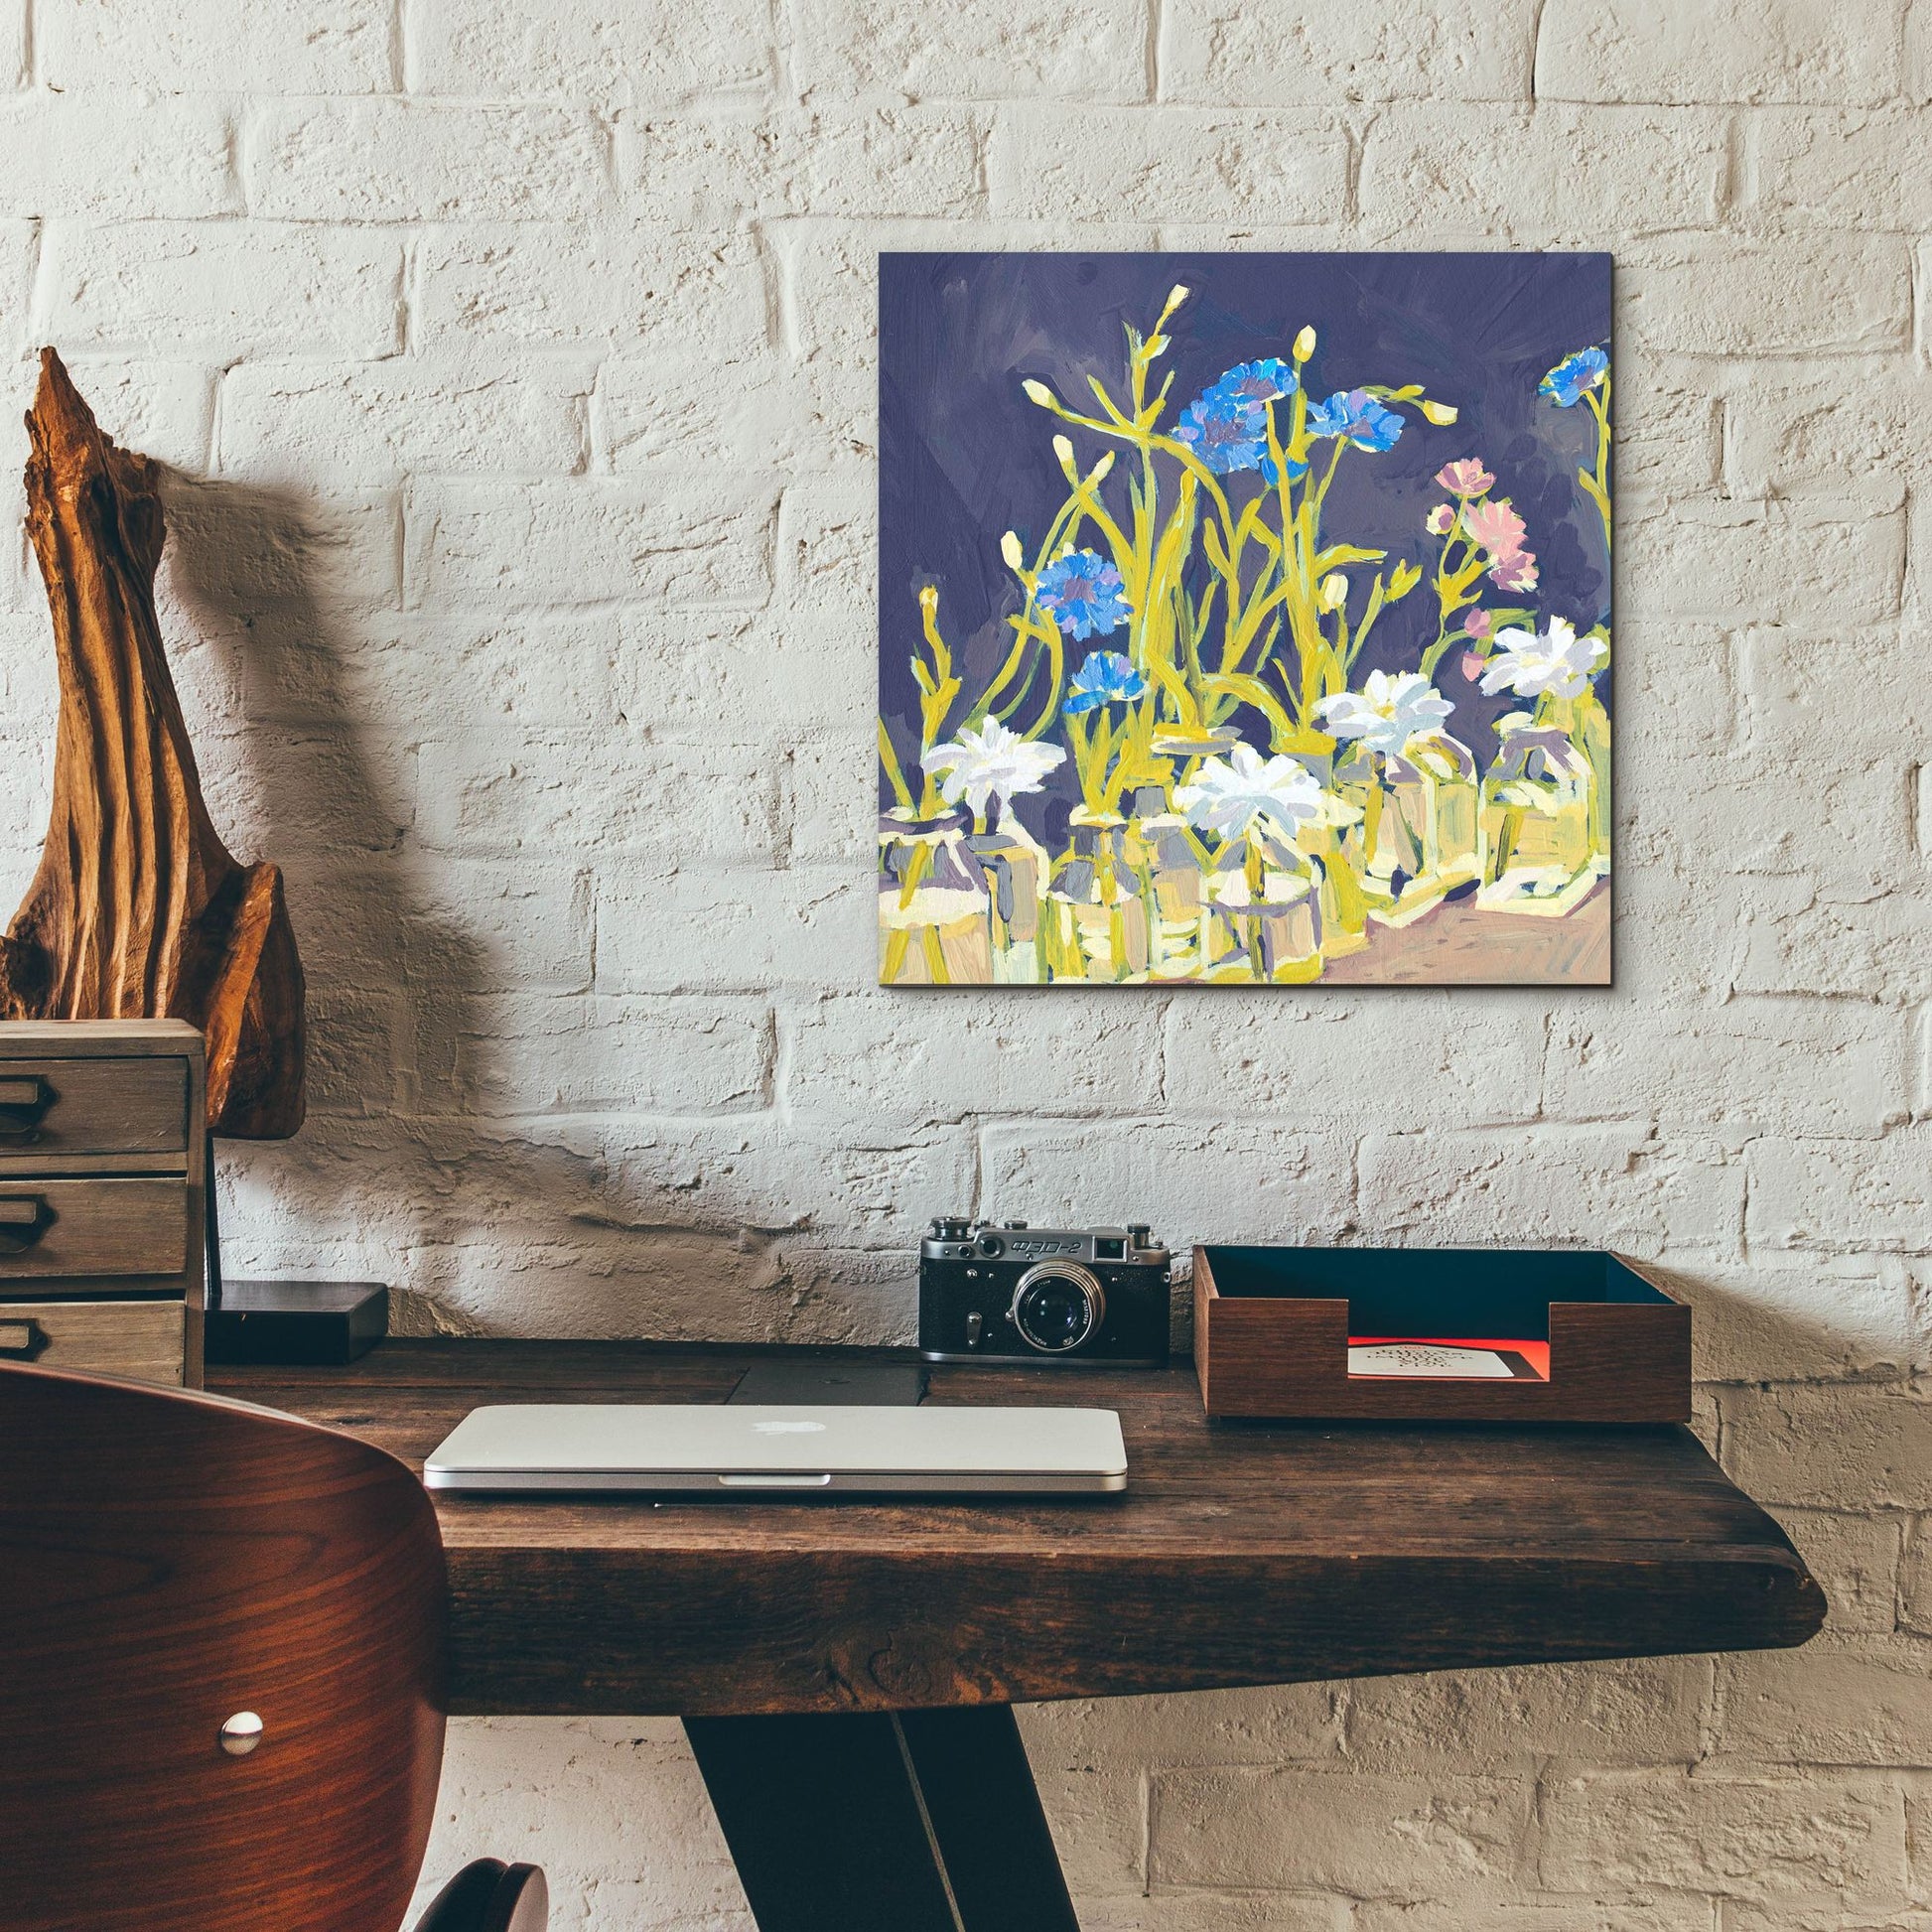 Epic Art 'Floral and Glass Menagerie' by Victoria Macmillan, Acrylic Glass Wall Art,12x12